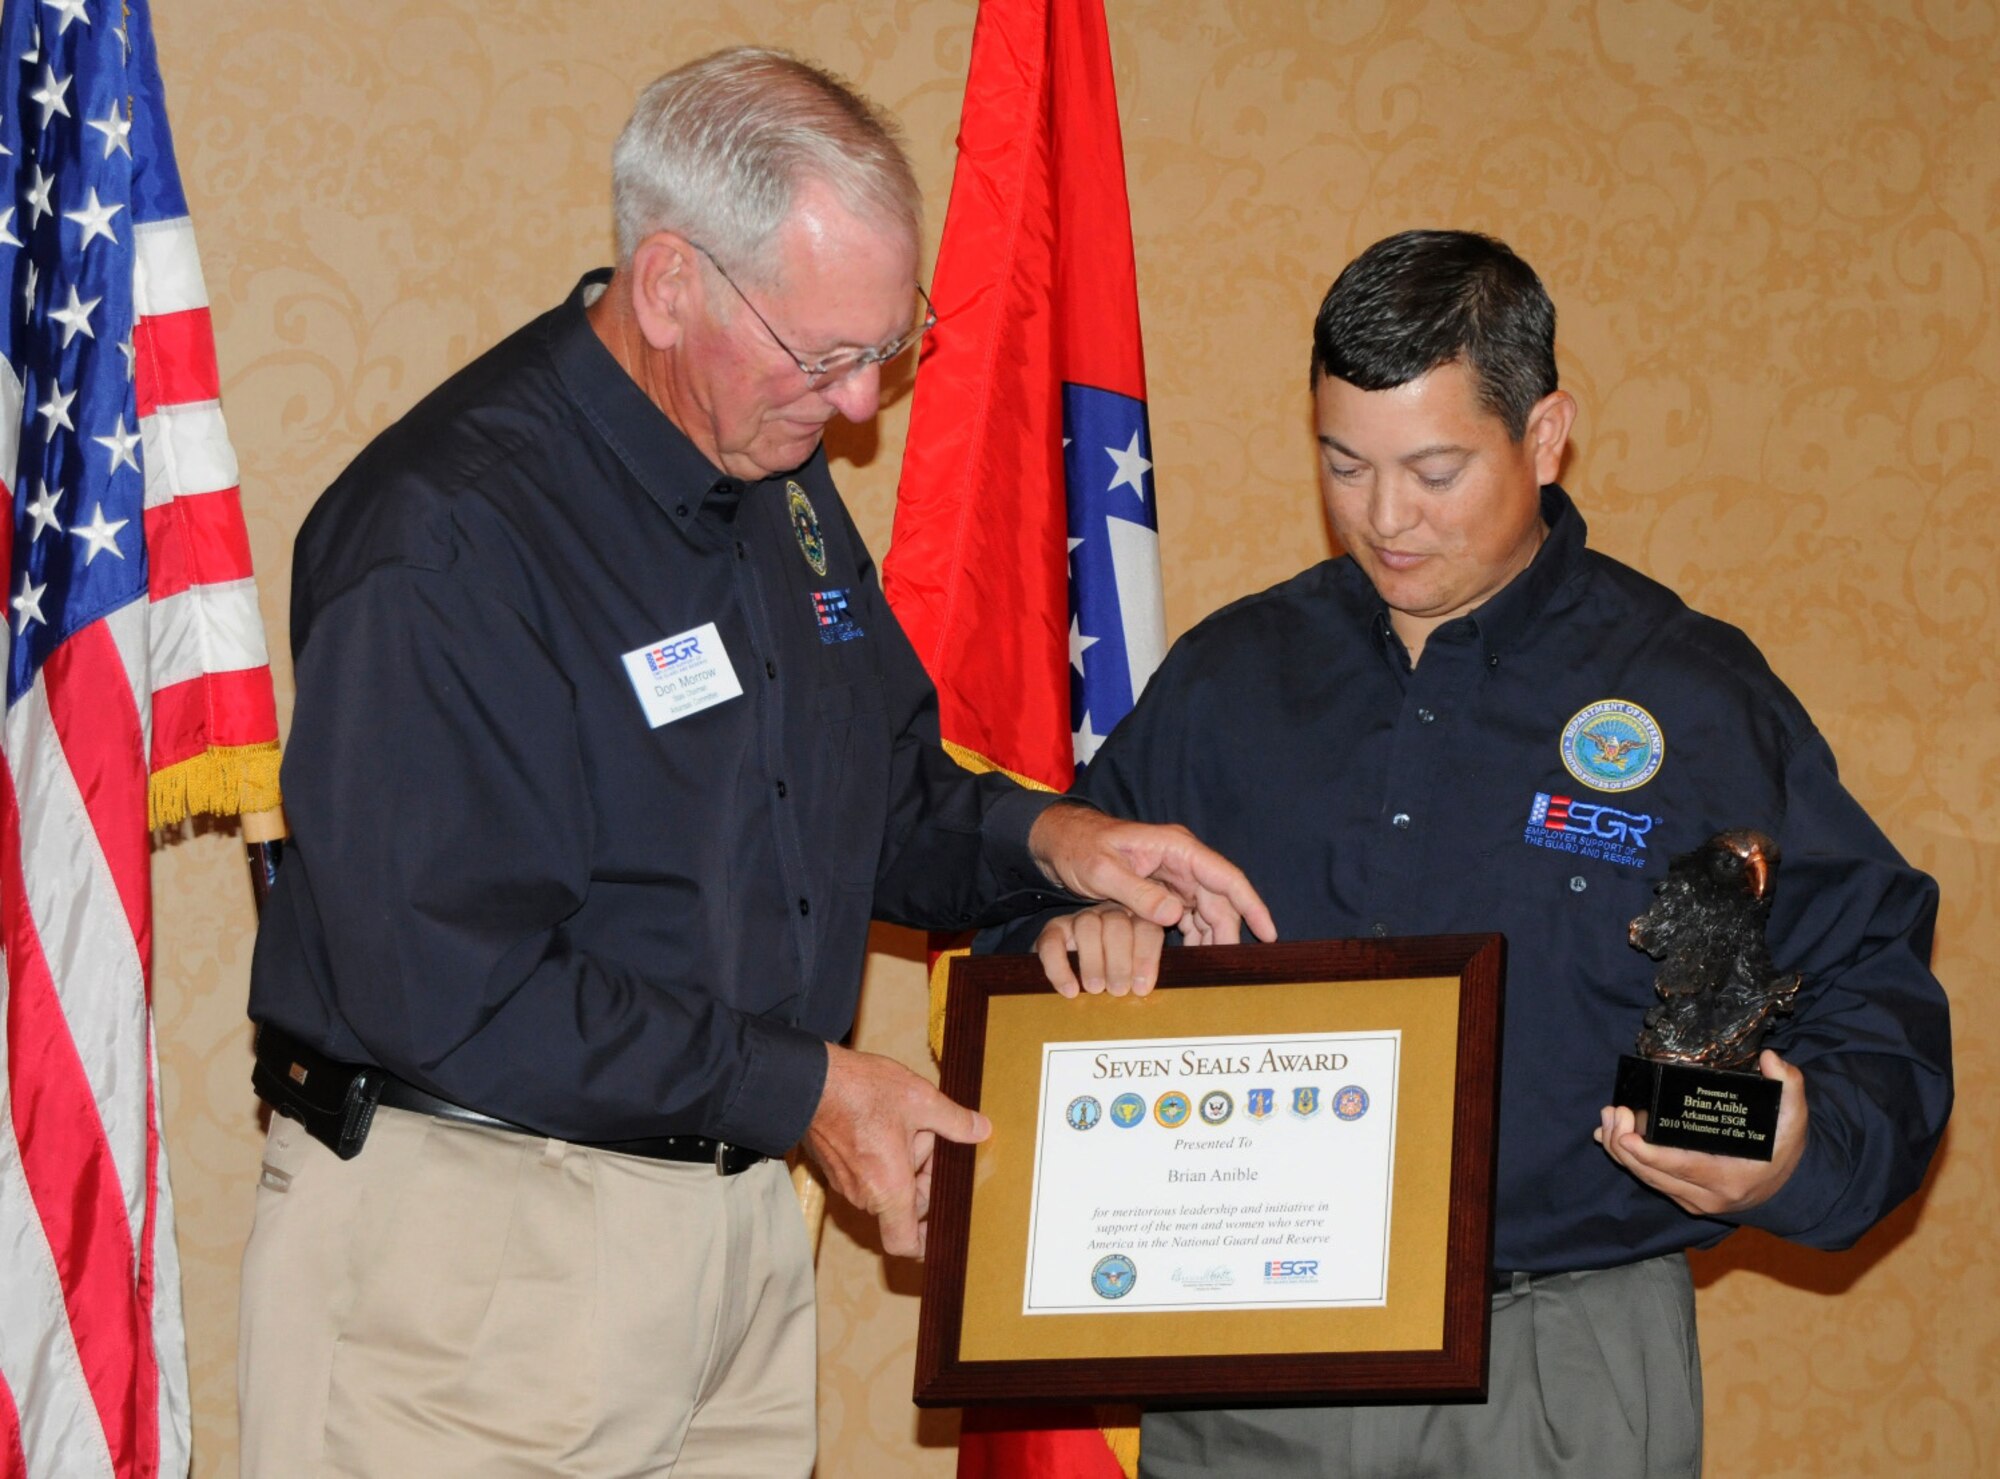 Master Sgt. Brian Anible of the 188th Aircraft Maintenance Squadron, right, accepts the Employer Support of the Guard and Reserve Volunteer of the Year award for the state of Arkansas from Maj. Gen. (Ret.) Don Morrow, Arkansas ESGR chair and former adjutant general for the Arkansas National Guard, at the ESGR Annual Employer Awards Luncheon held July 21 at the Embassy Suites Hotel in Hot Springs, Ark. (U.S. Air Force photo by Lt. Col. Keith Moore/Arkansas National Guard public affairs)